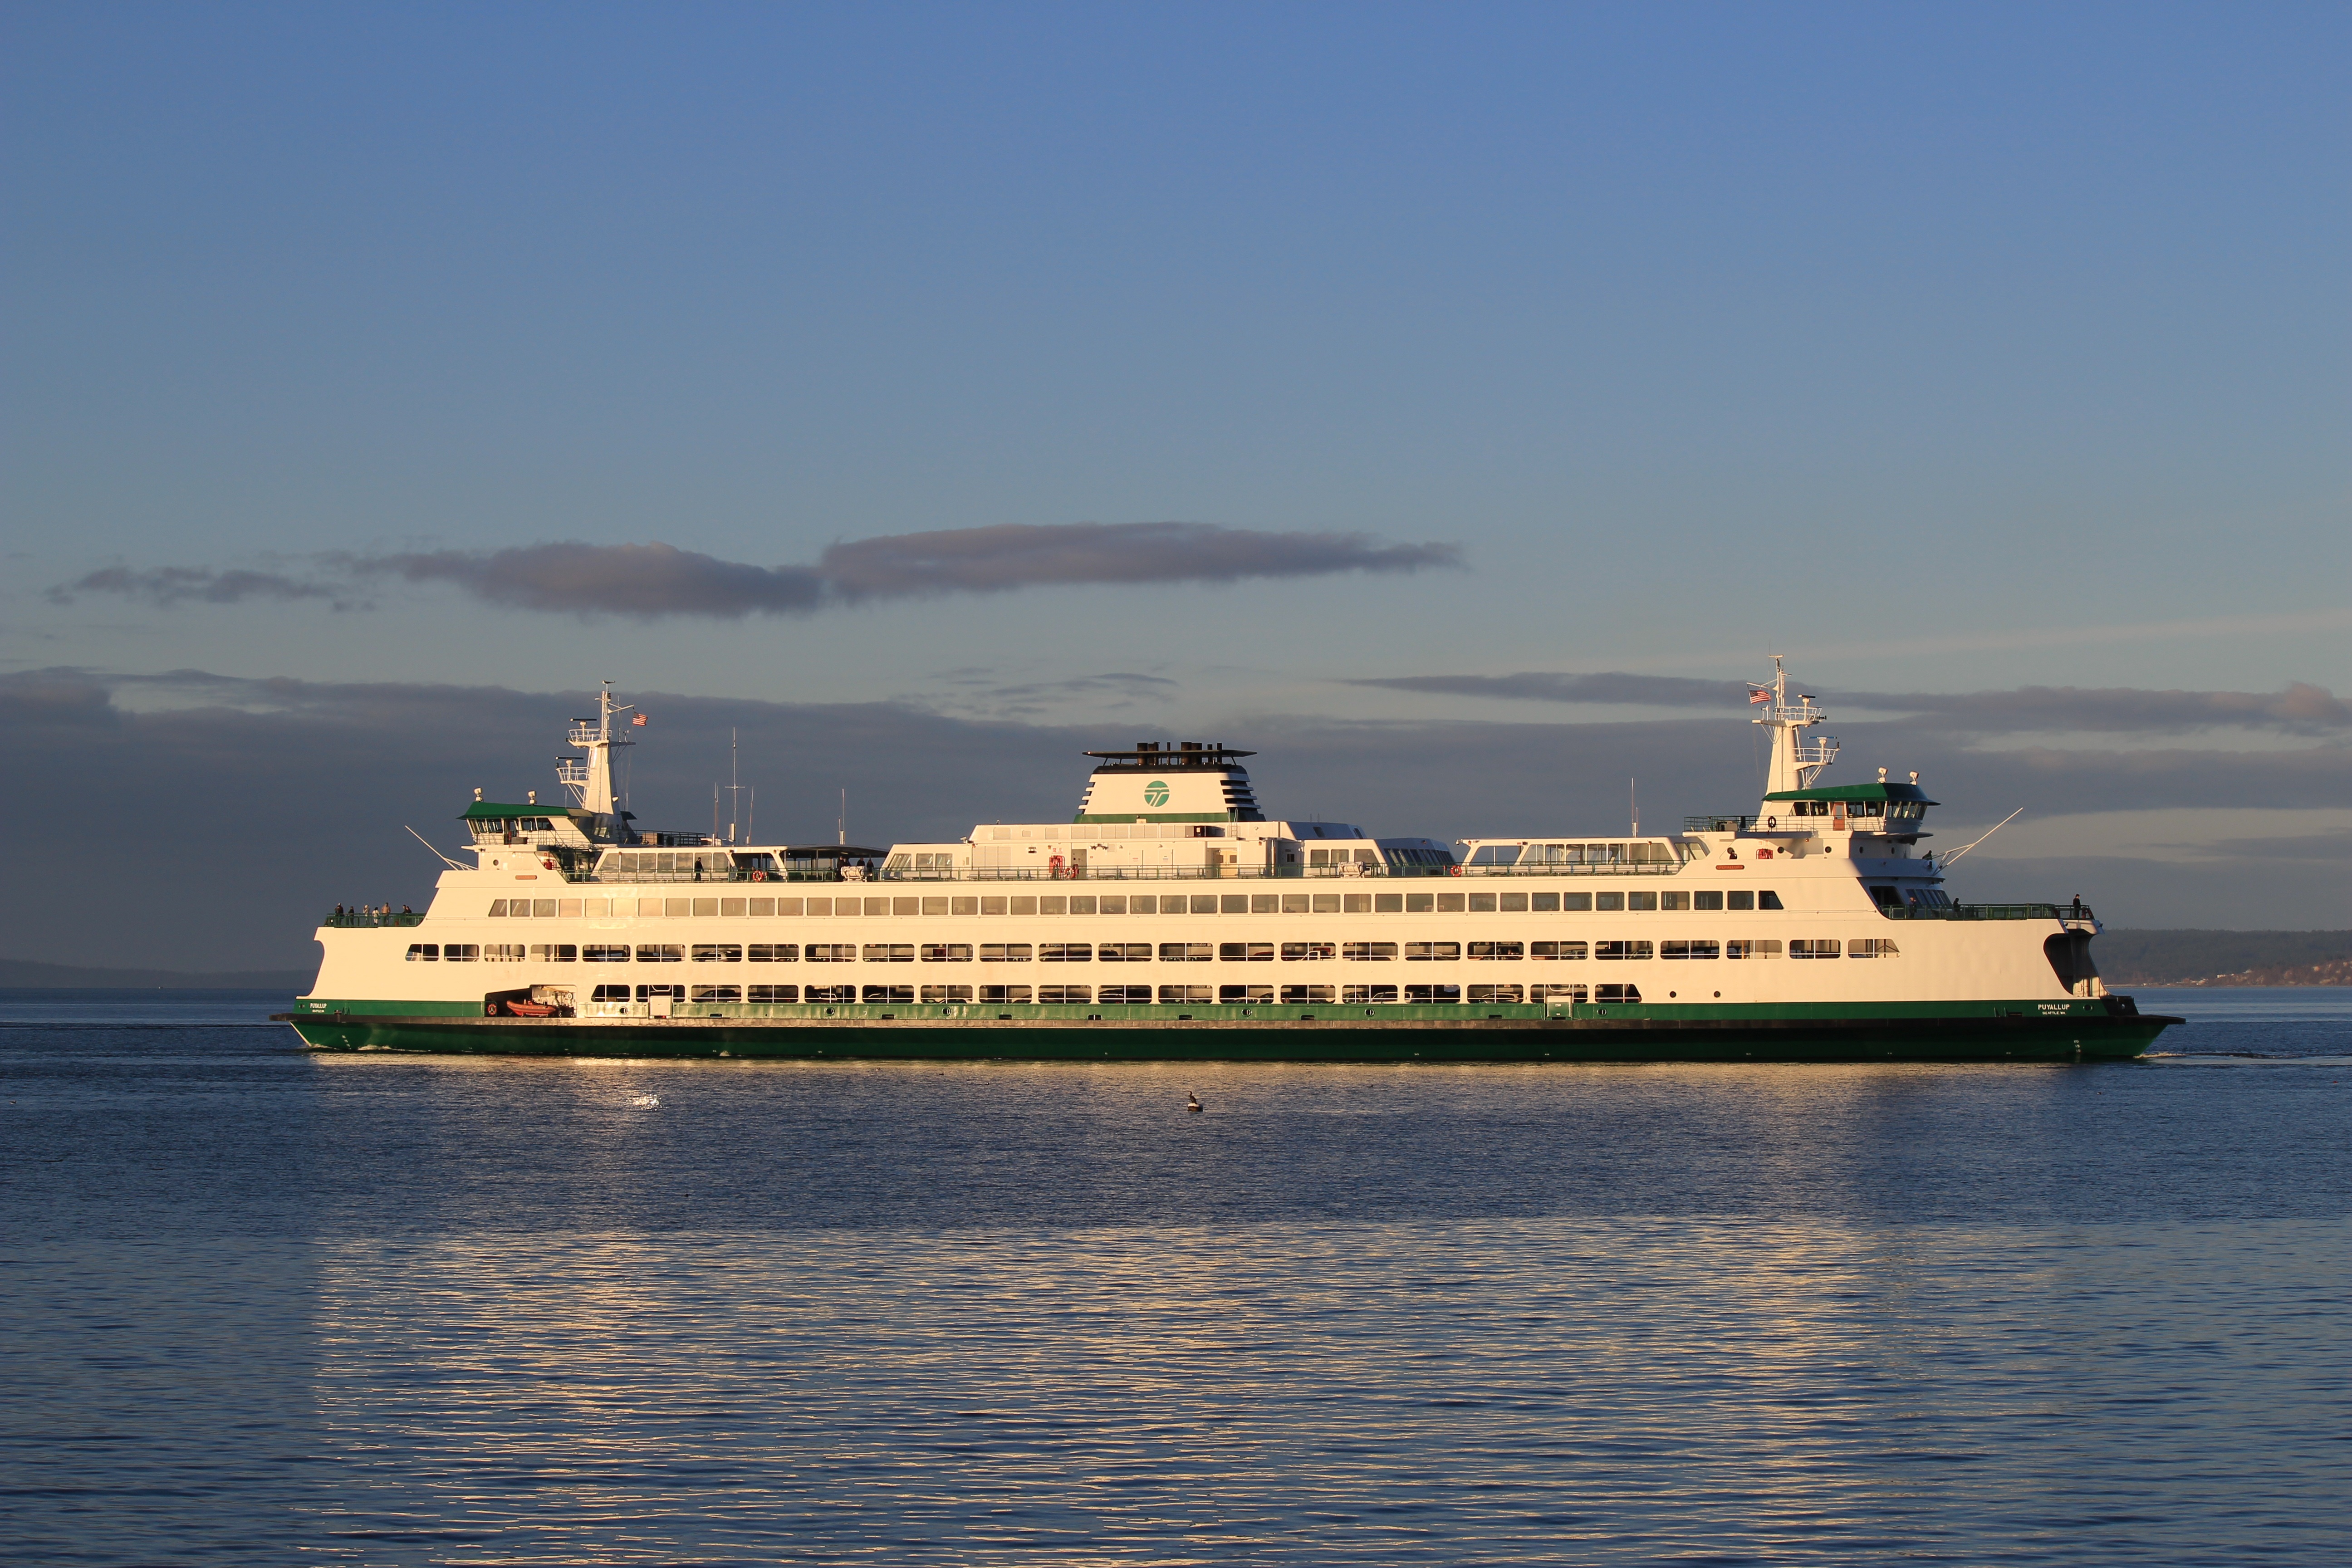 MV Puyallup is a Jumbo Mark II Class ferry operated by Washington State Ferries. by PixelMakerEric